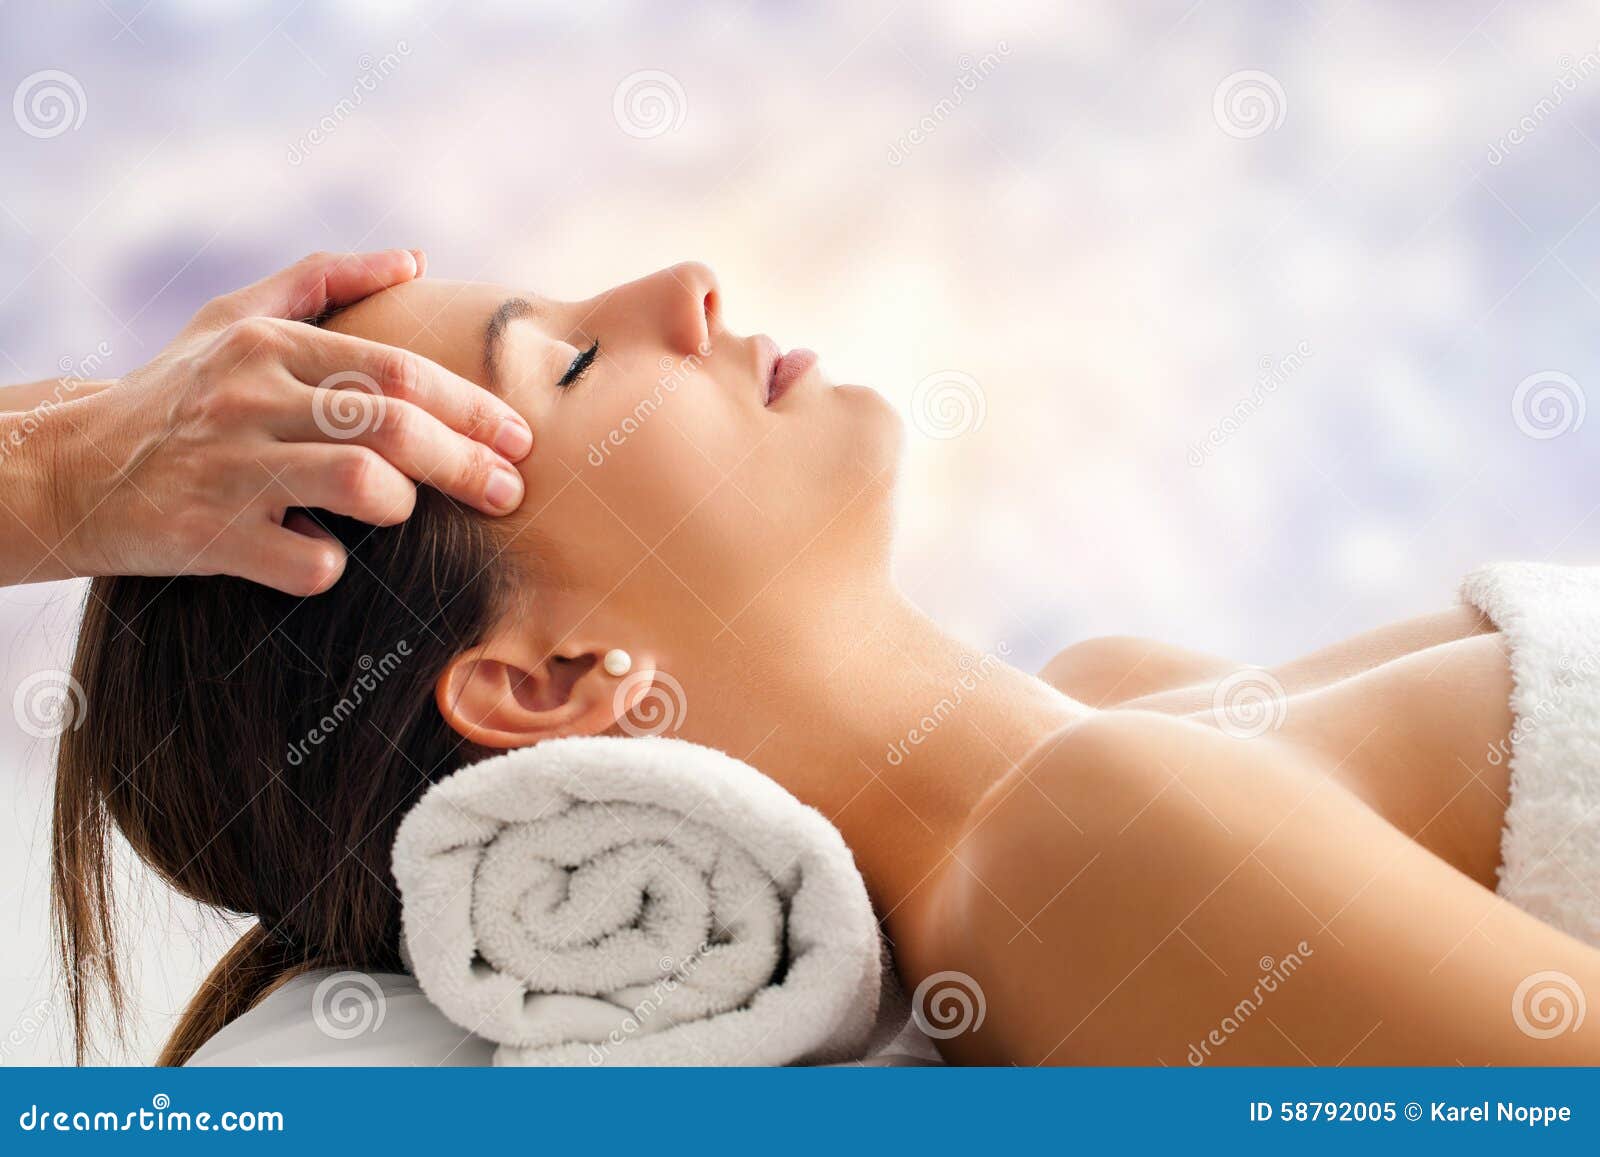 Woman Having Relaxing Facial Massage Stock Image Image Of Relaxation